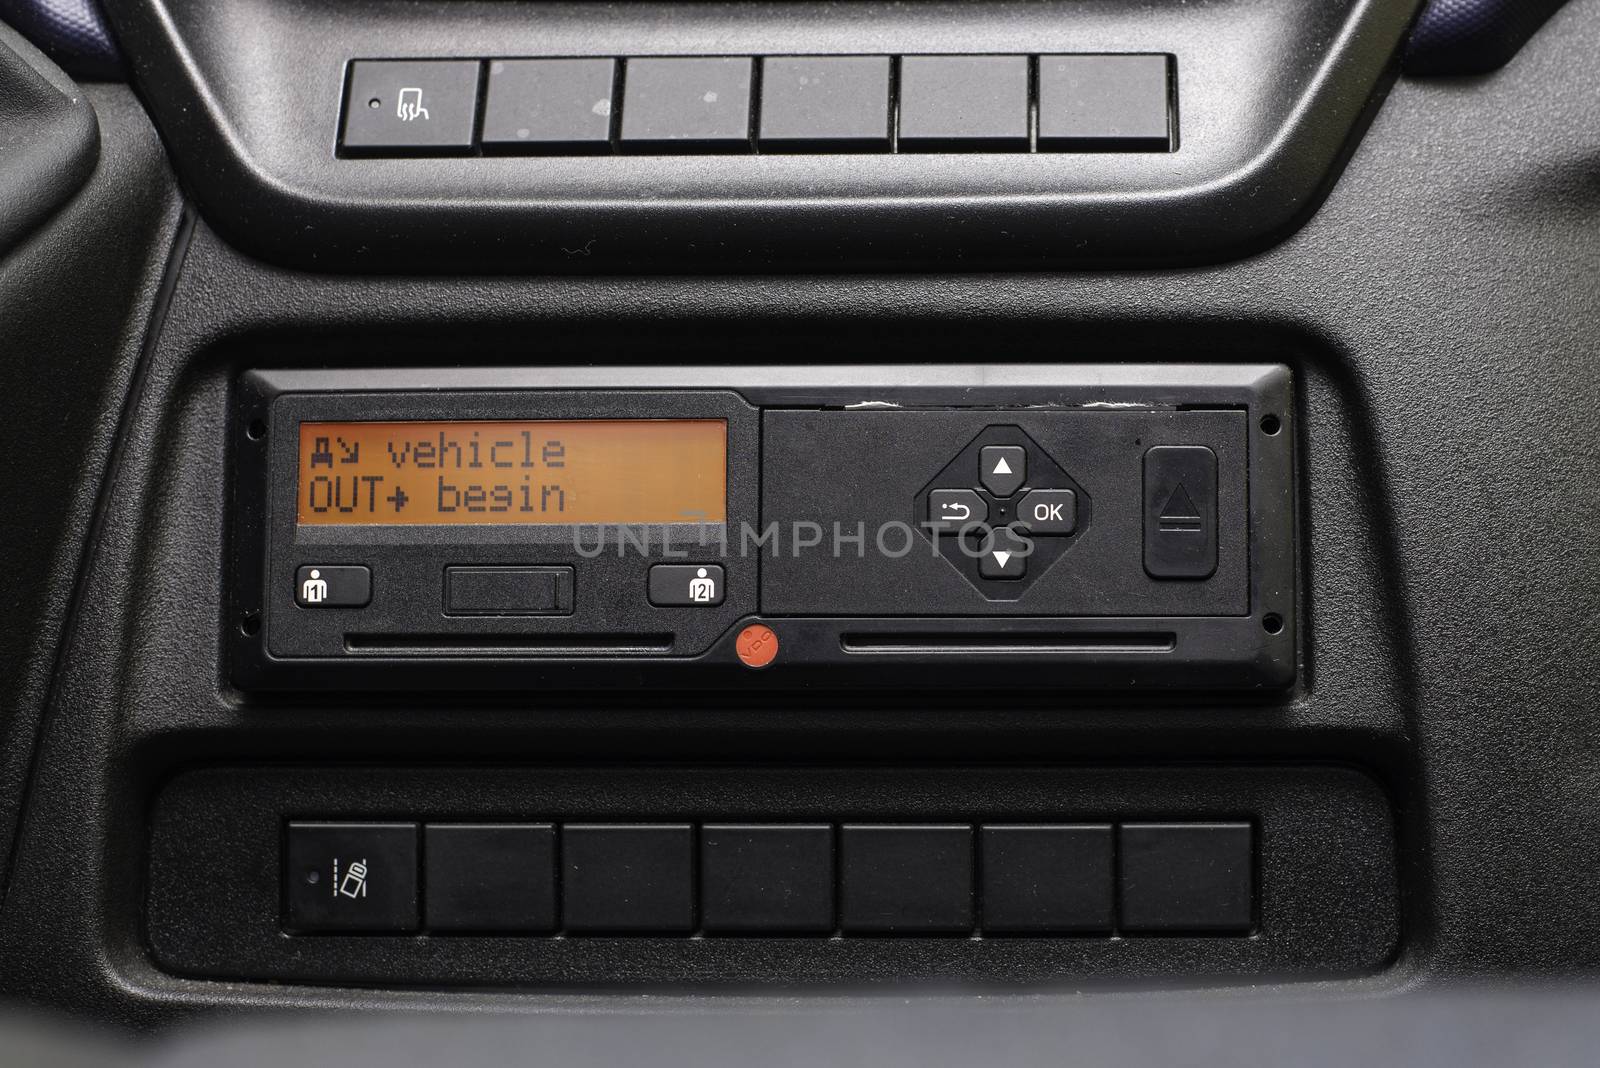 Digital tachograph display reads Vehicle Out Begin. No personal data. Tachograph in a van.